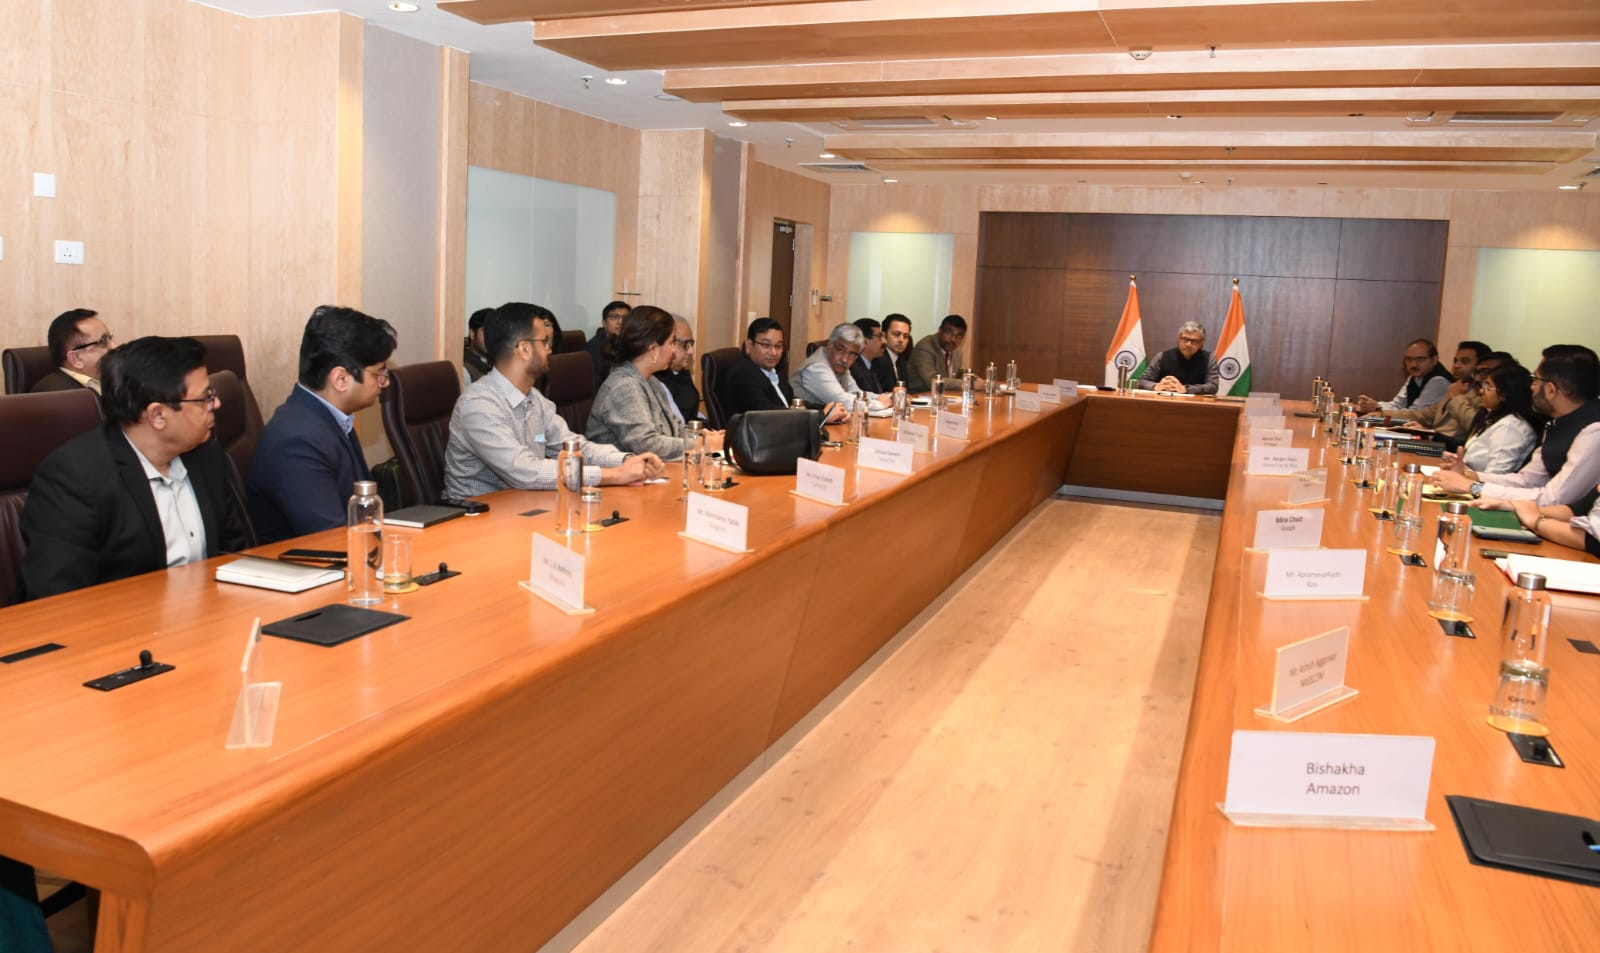 India's IT Minister with executives from Meta, Google, Amazon and other companies